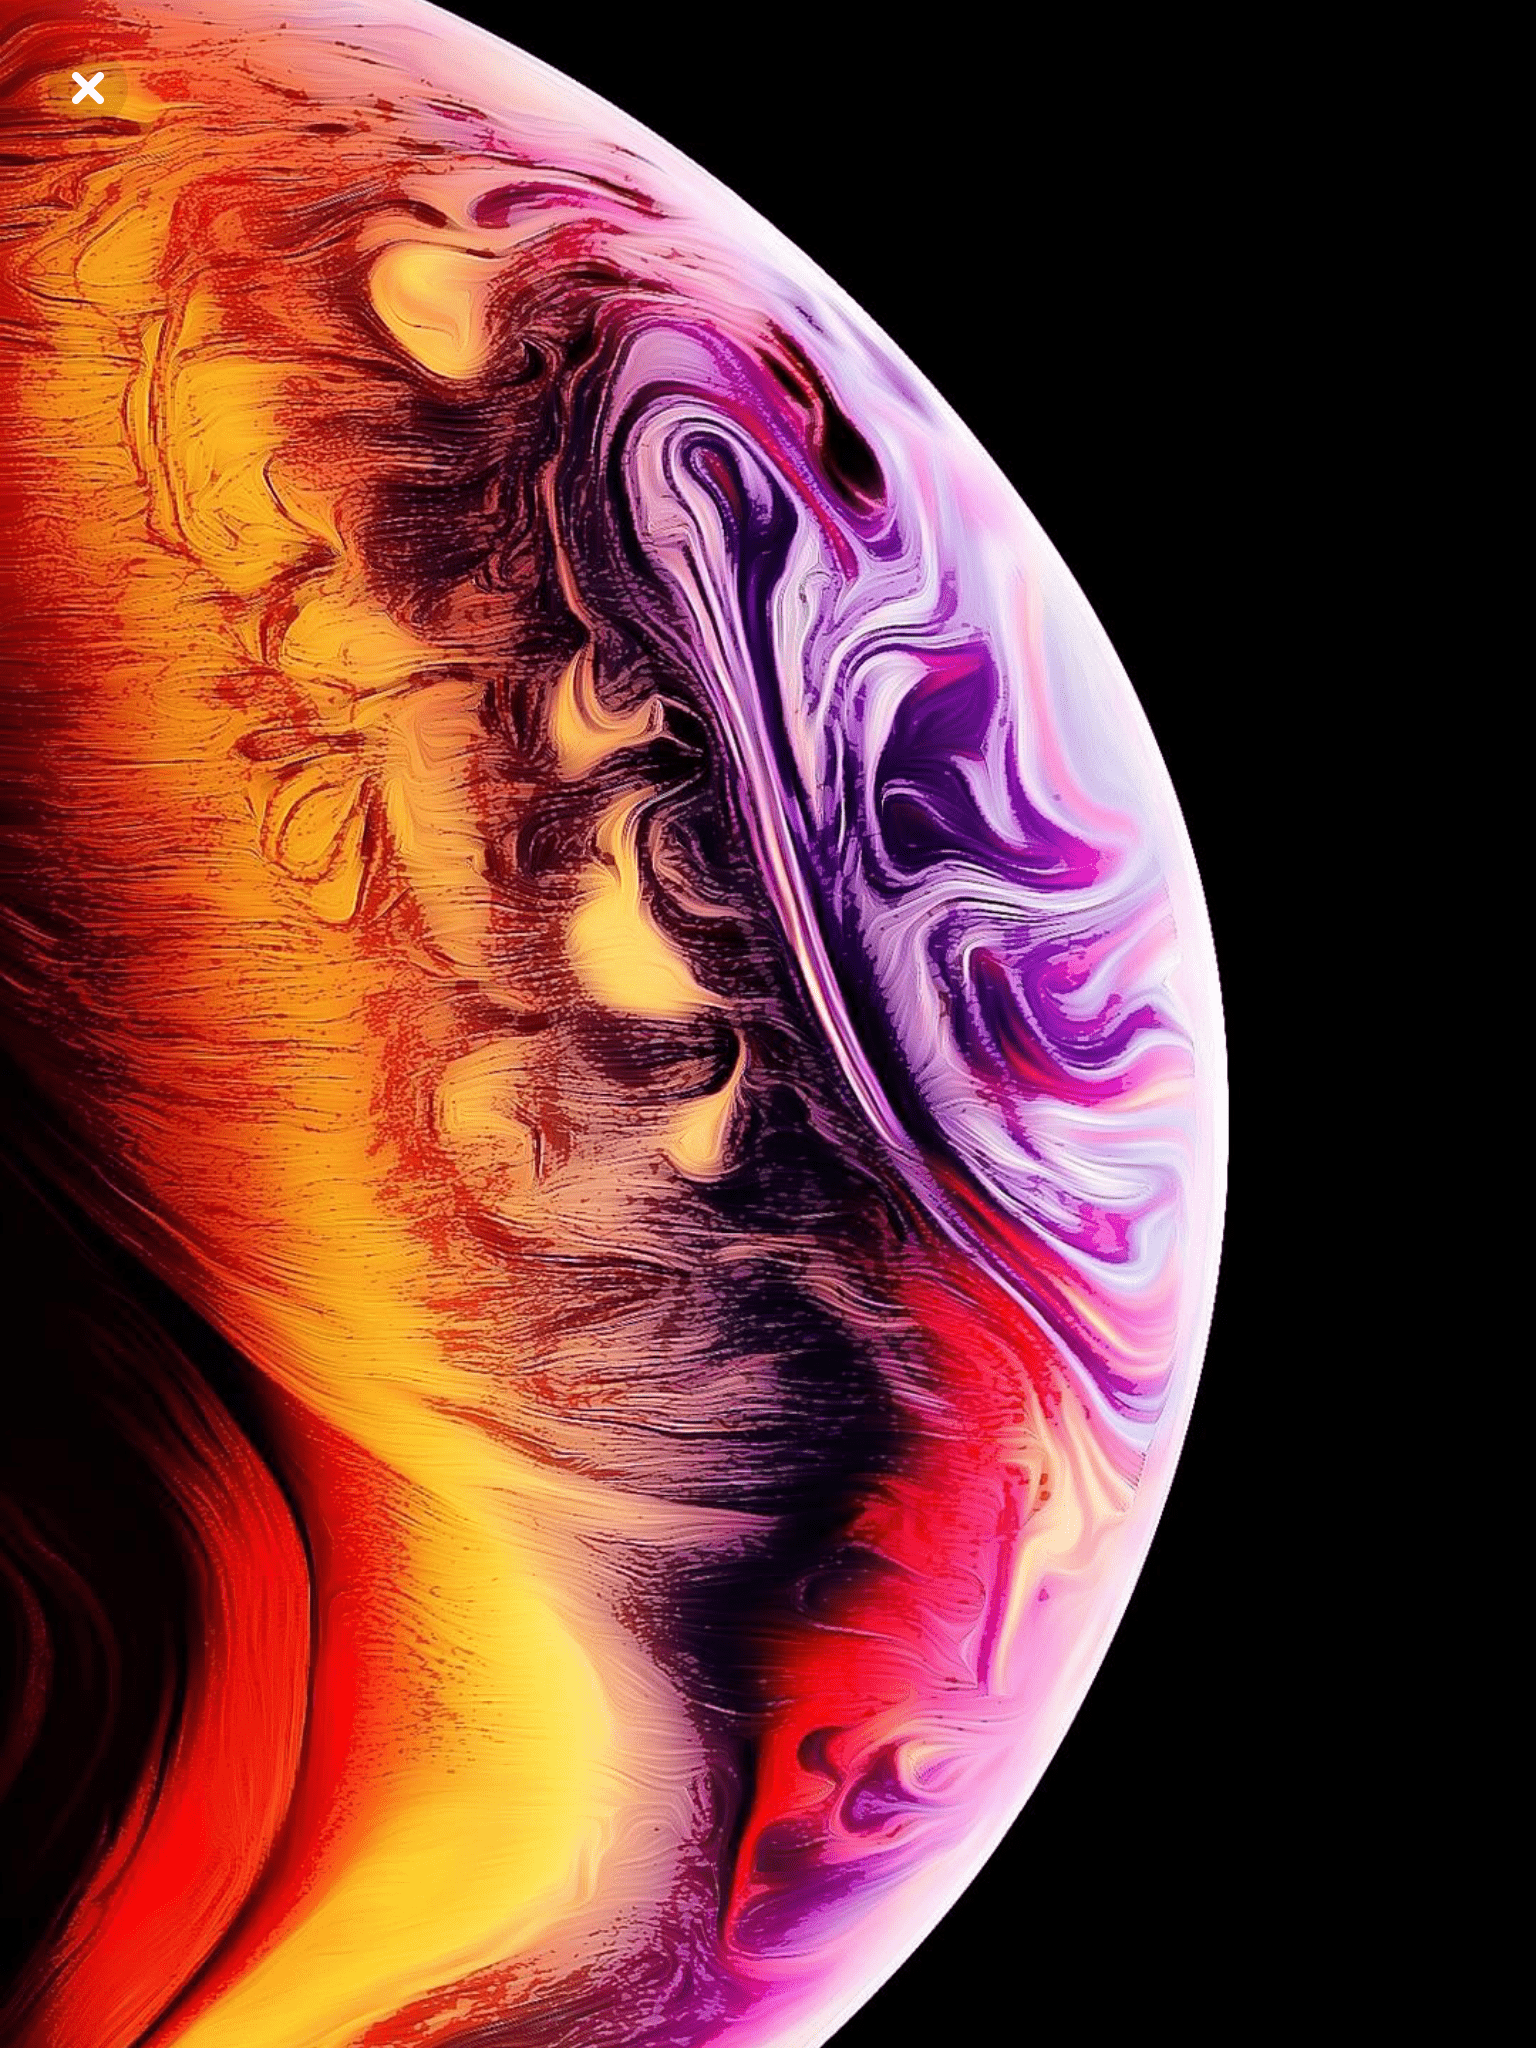 Iphone 11 Pro Max Wallpapers Top Free Iphone 11 Pro Max Backgrounds Wallpaperaccess